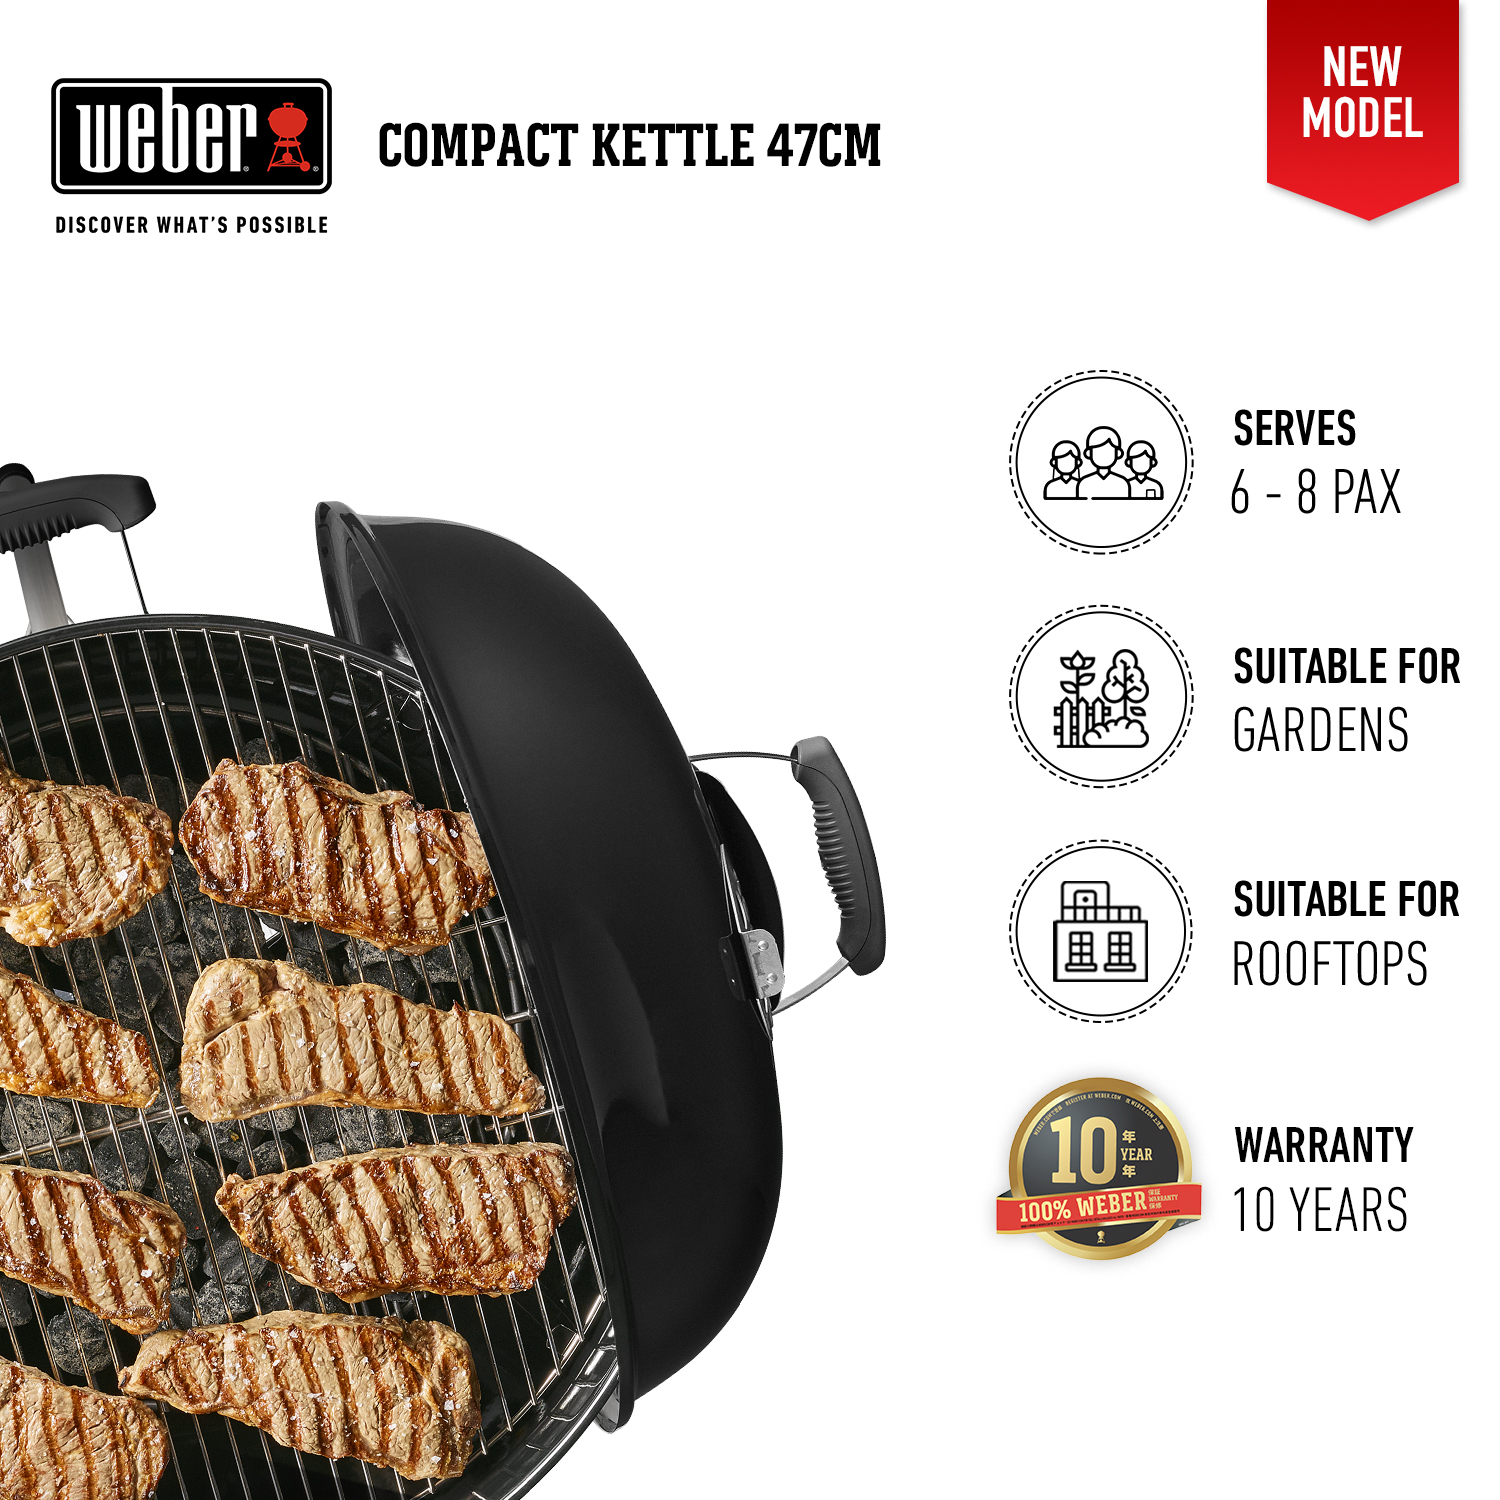 meester Paar Luchten Weber Compact Kettle 47cm (18.5") Charcoal Grill With Thermometer -  Cookaburra BBQ